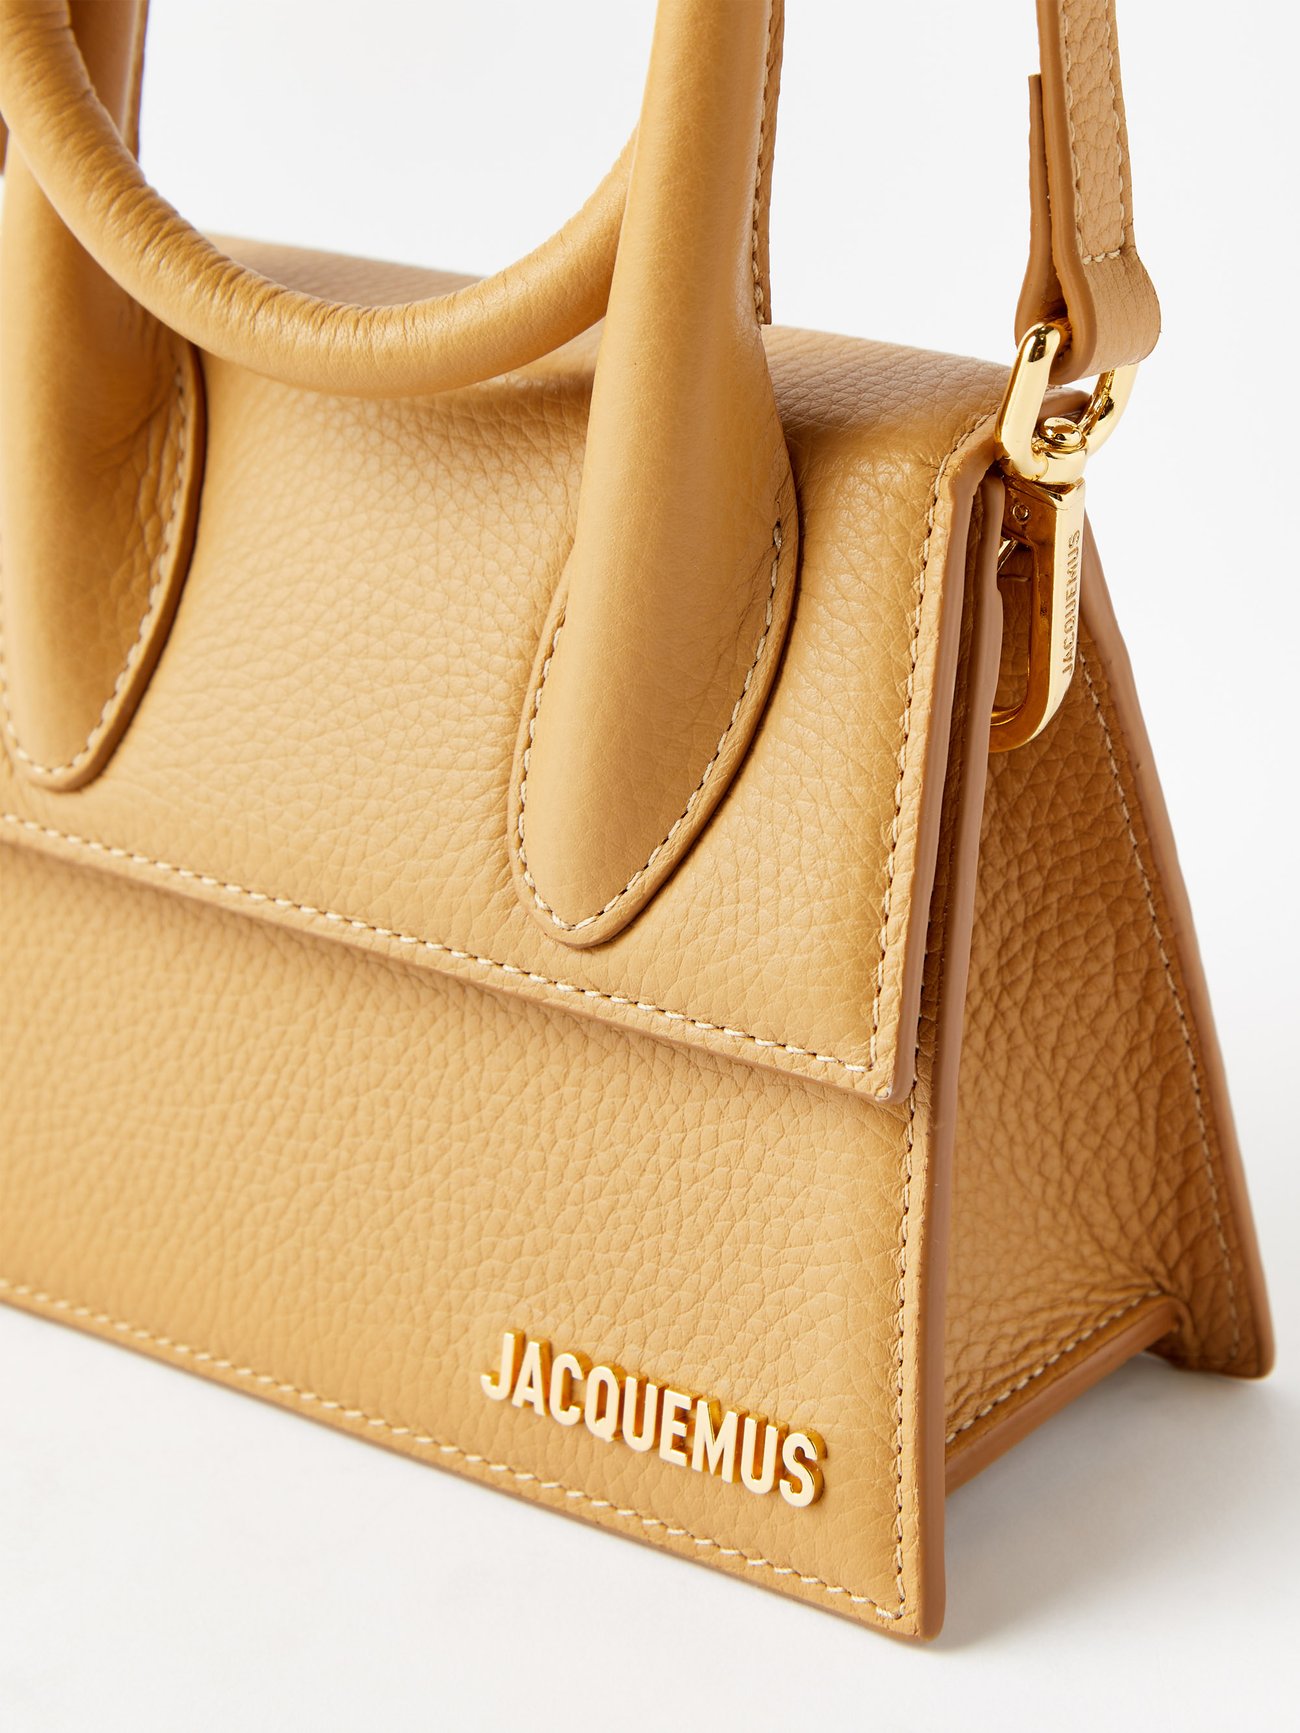 Jacquemus Le Chiquito Y Brown Mini Bag in Gold Hardware